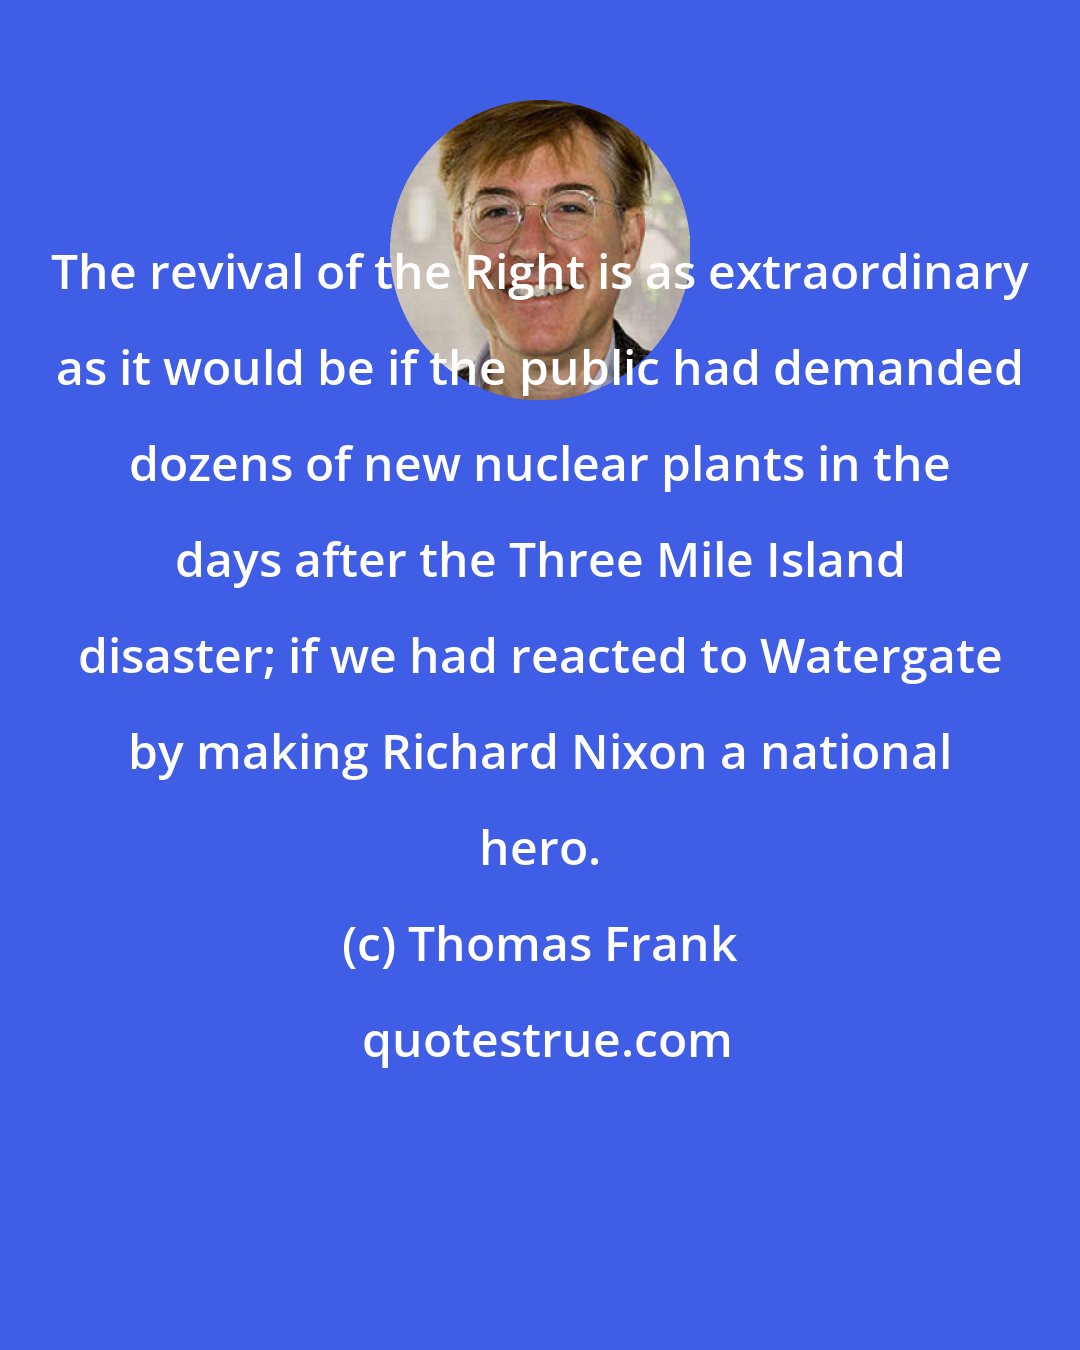 Thomas Frank: The revival of the Right is as extraordinary as it would be if the public had demanded dozens of new nuclear plants in the days after the Three Mile Island disaster; if we had reacted to Watergate by making Richard Nixon a national hero.